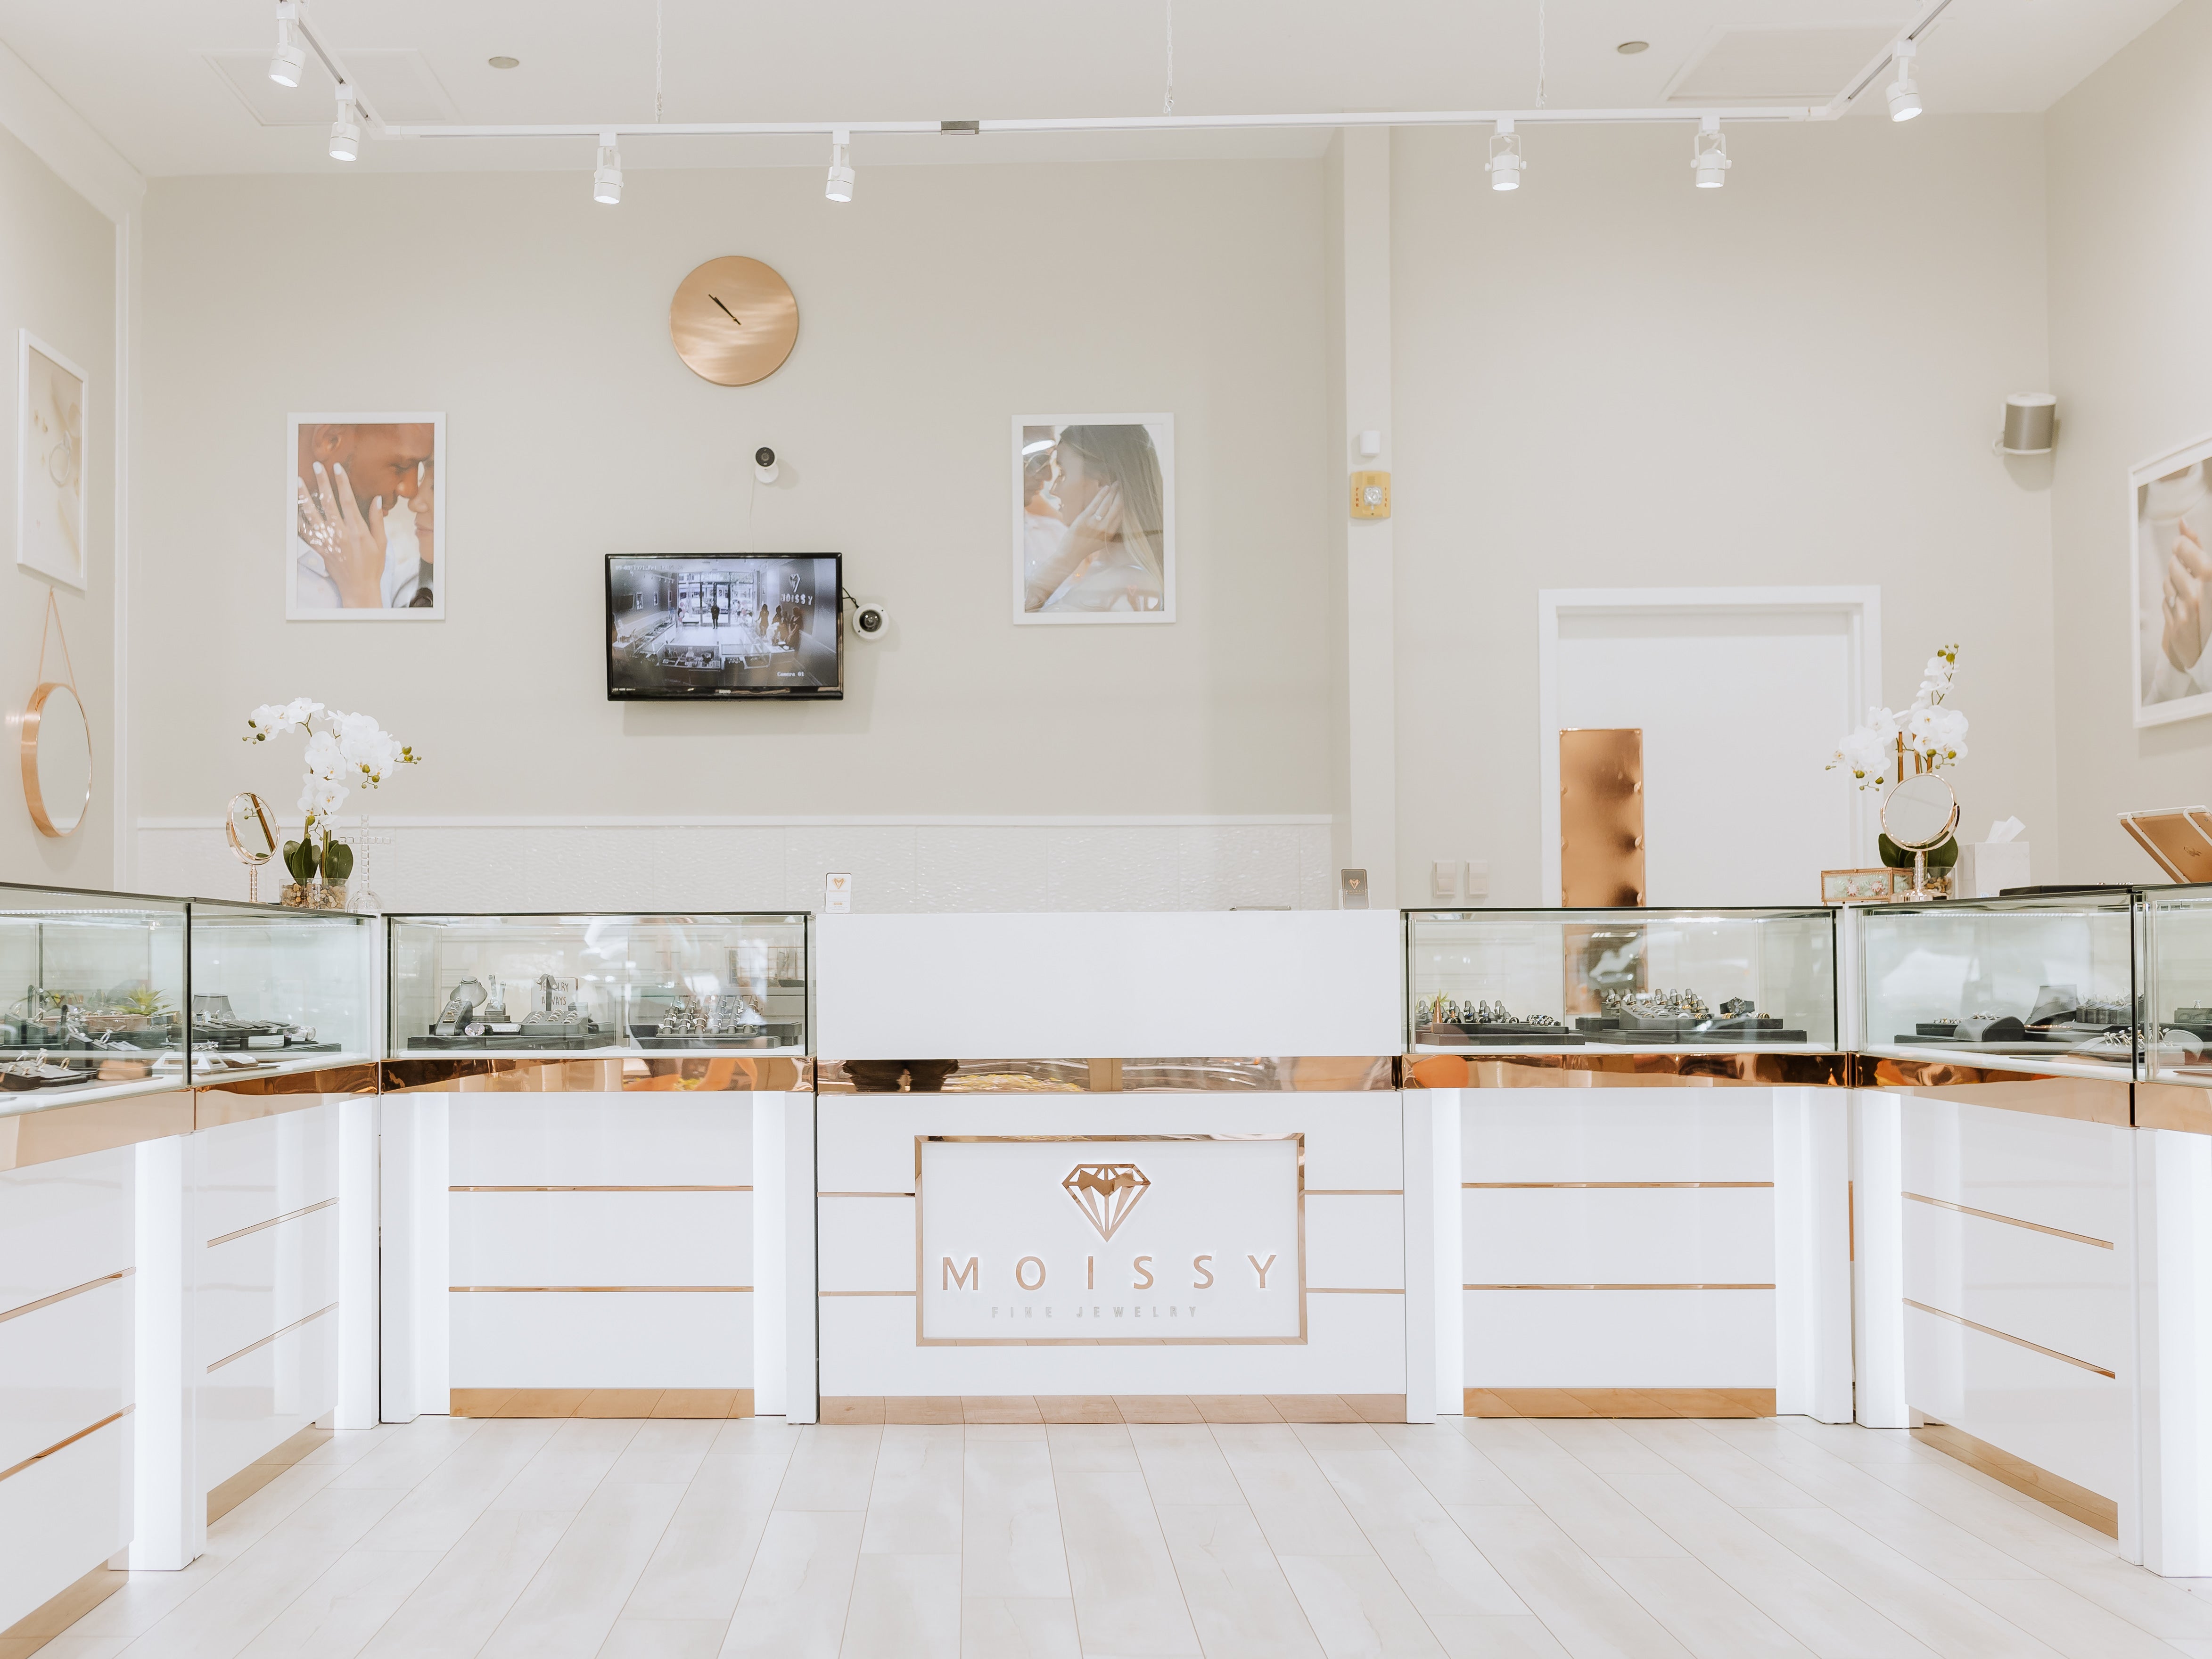 Why I took my Private Jewellery business to the Retail Market